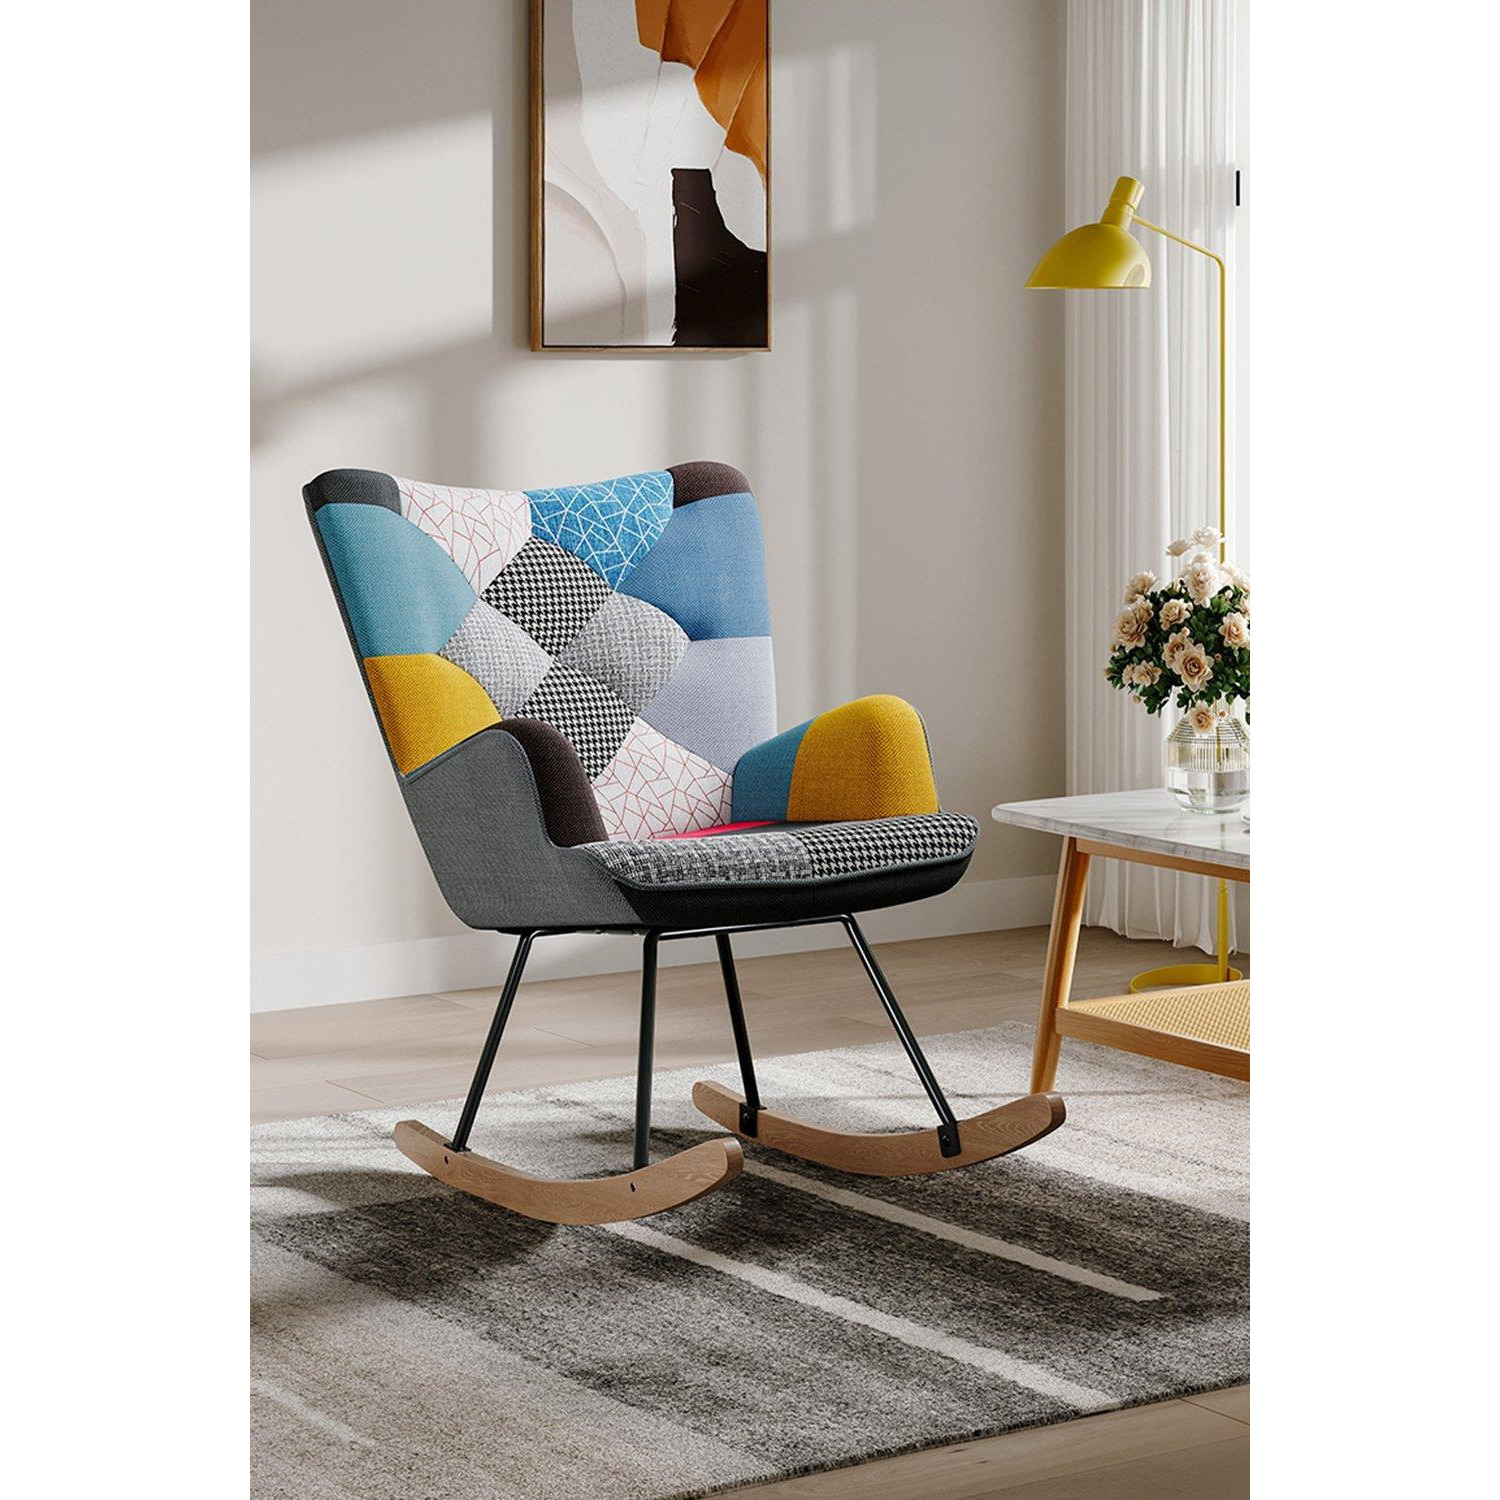 Terry Cloth Colourful Multi-pattern Patchwork Rocking Chair - image 1